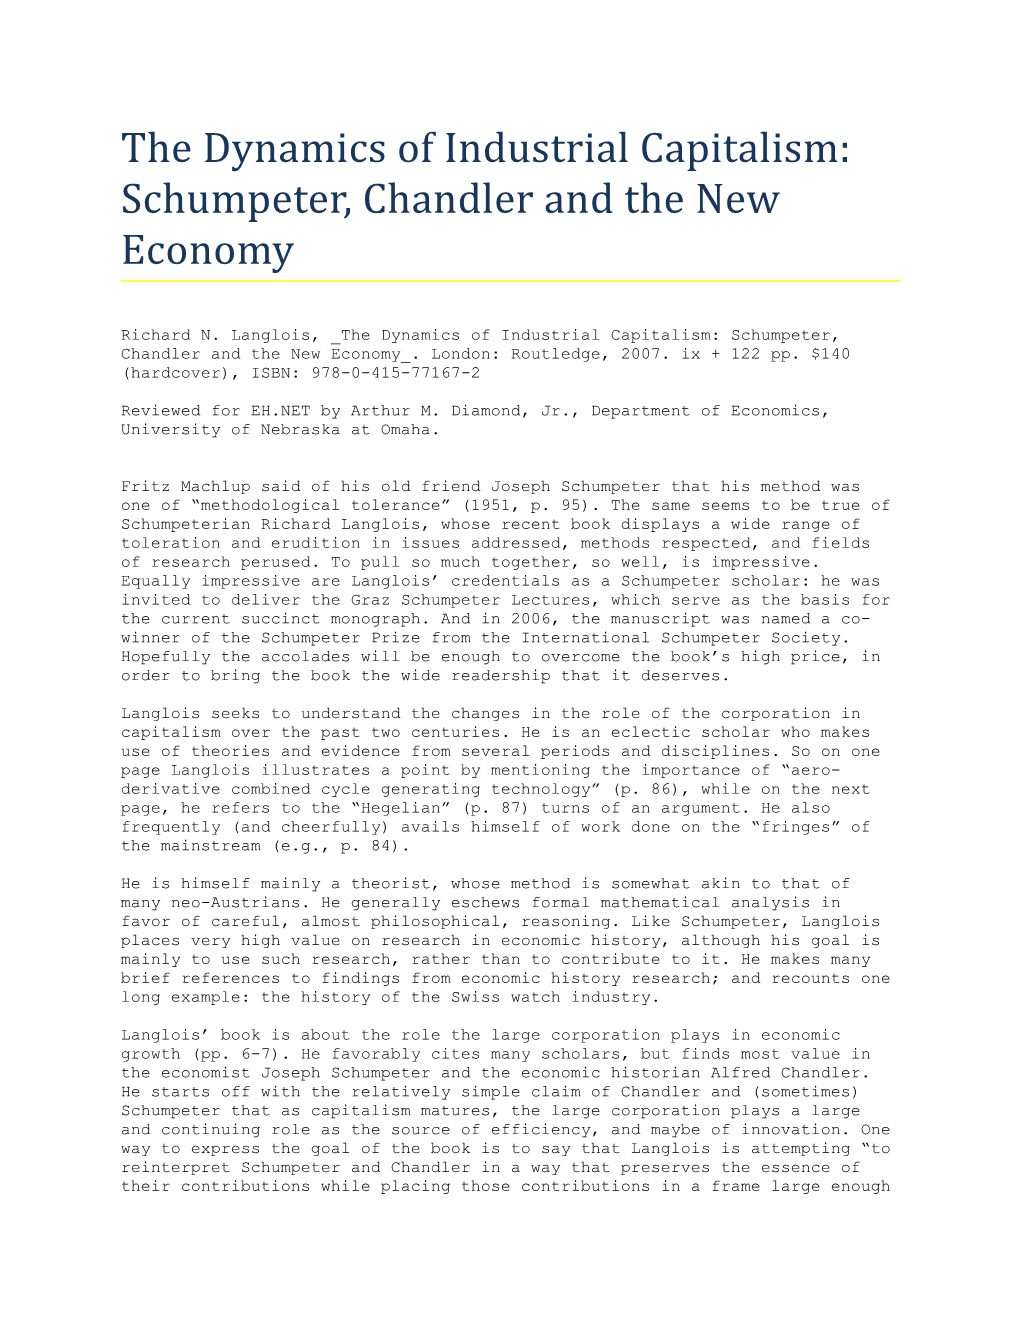 The Dynamics of Industrial Capitalism: Schumpeter, Chandler and the New Economy